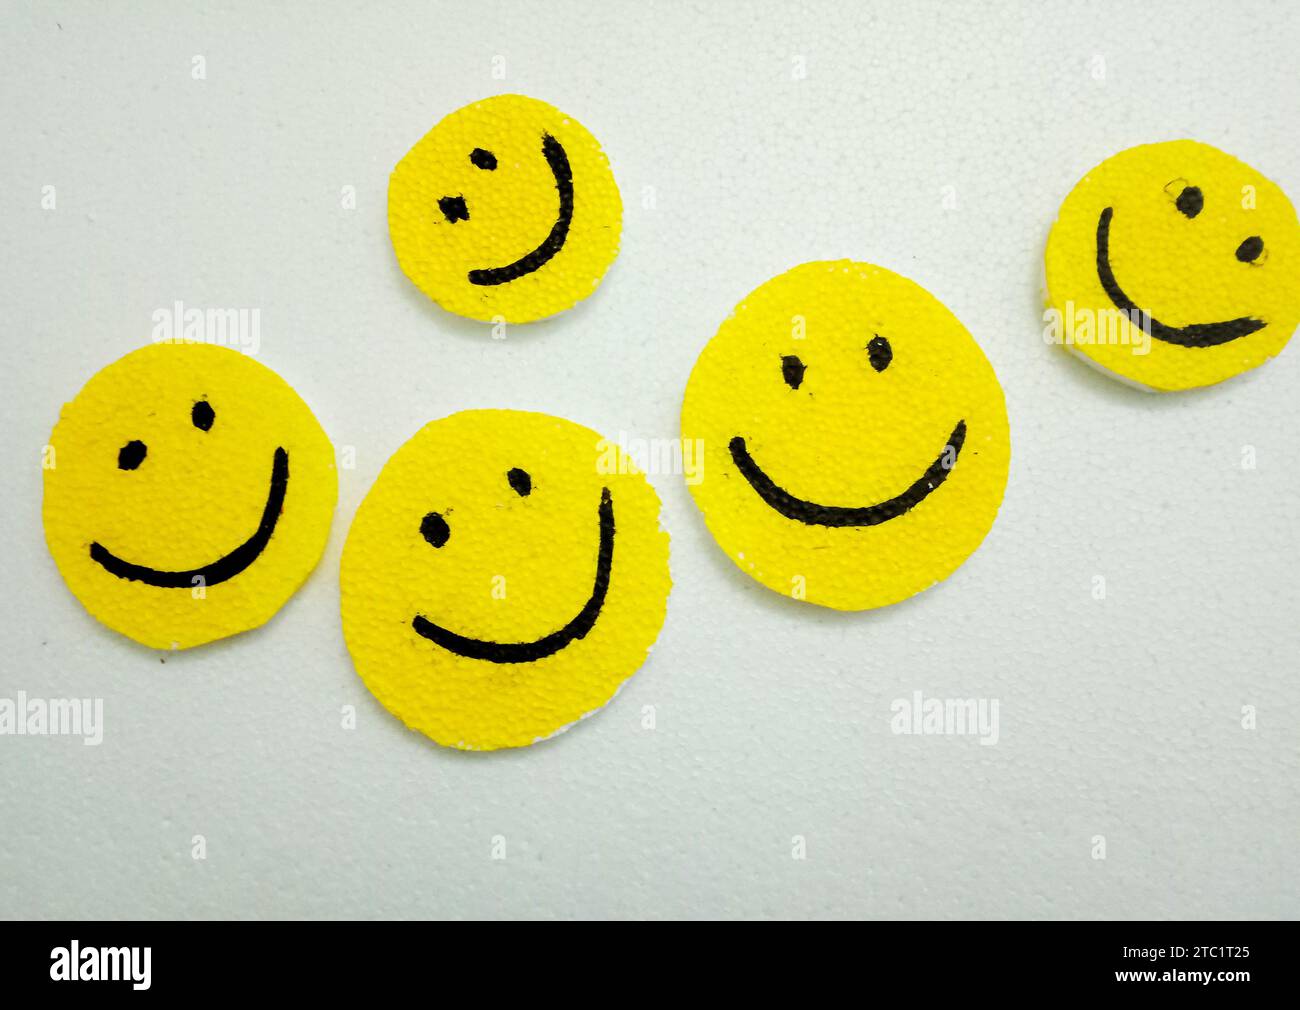 Crafted smiley face icons against white background. Happy, joy, smiling, positive vibes, together, fellowship, love and group of happy people concepts Stock Photo